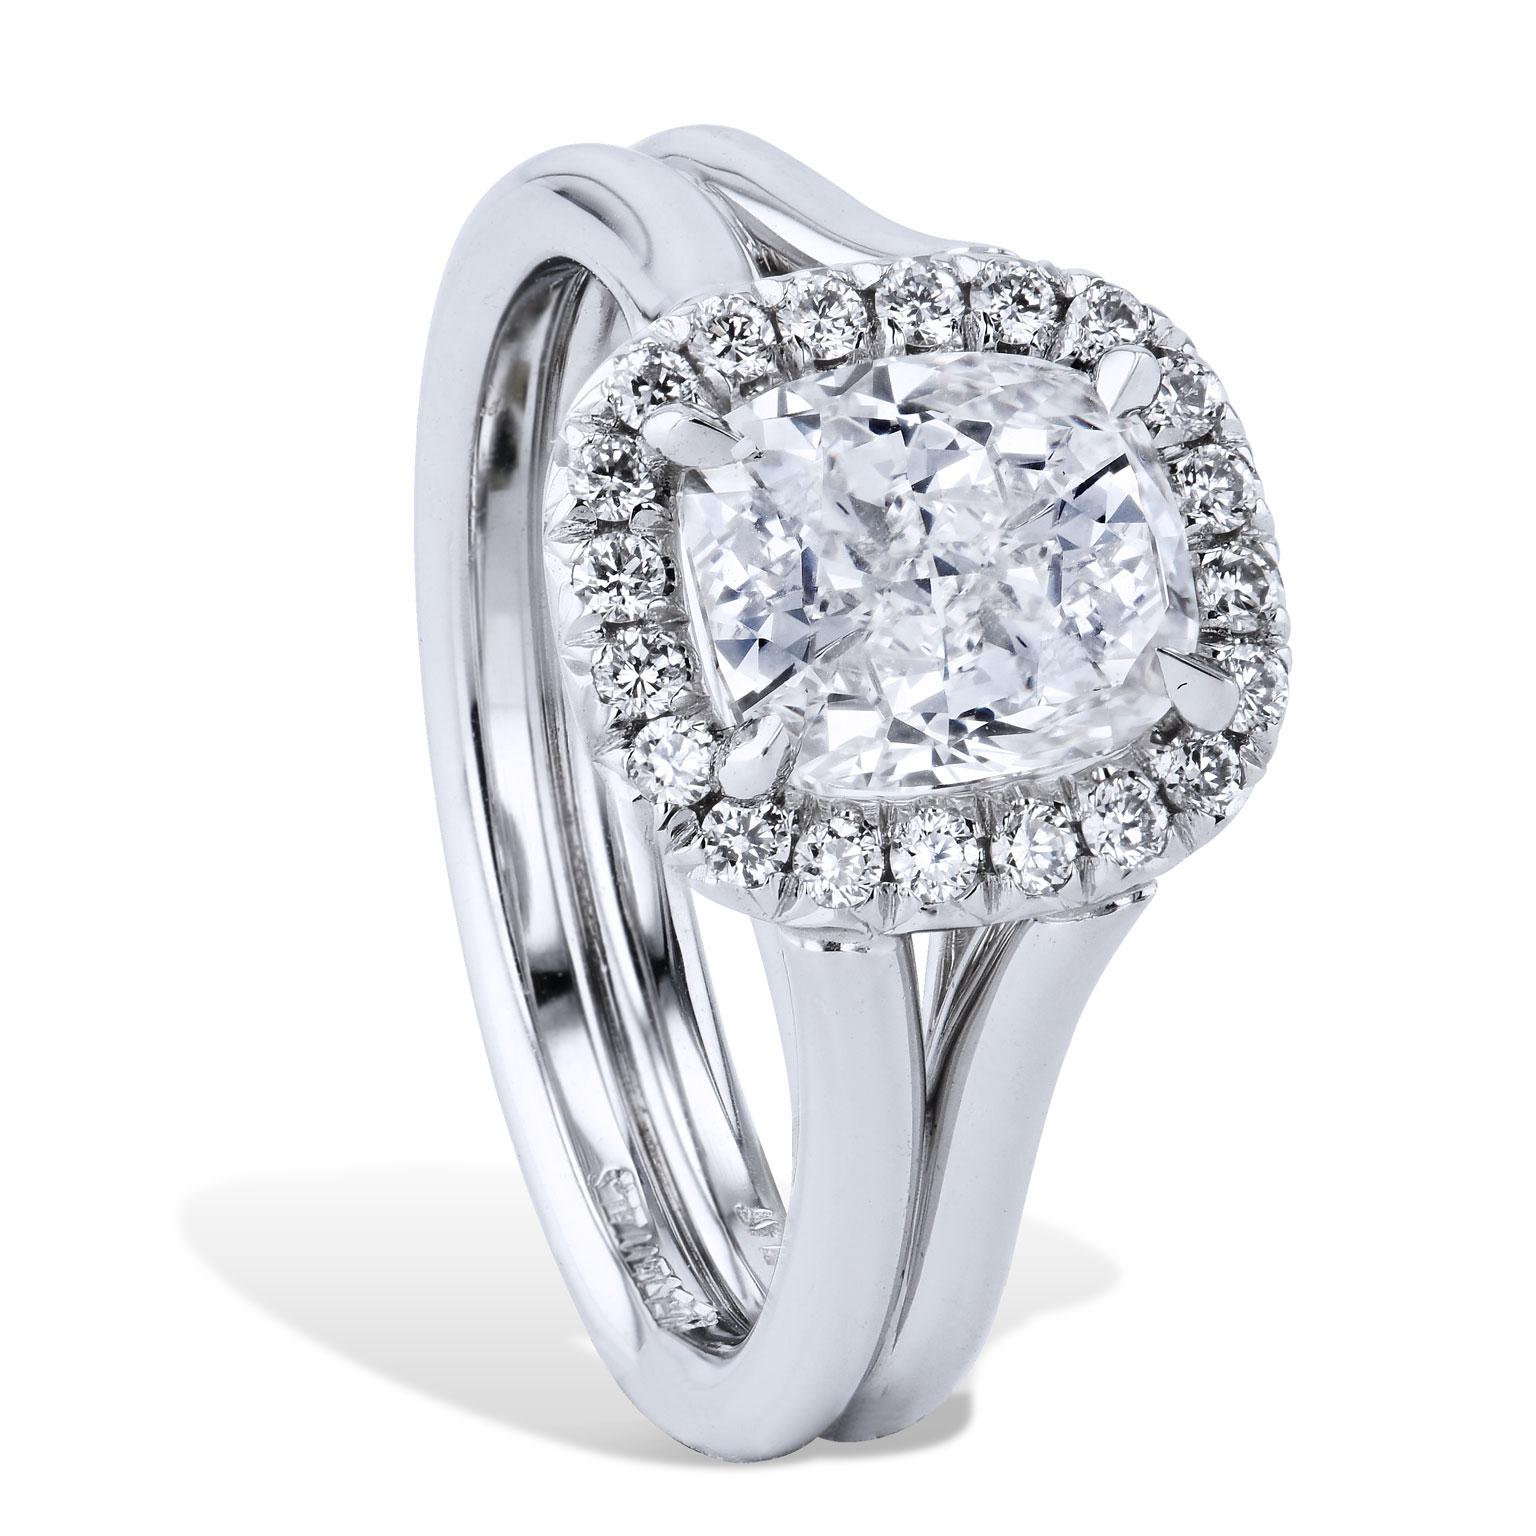 GIA Certified 2.02 Carat Diamond and Platinum Halo Engagement Ring made by H&H 

Add some sparkle to your finger with this 2.02 carat diamond (H/VS1, GIA Cert. #3195594416) engagement ring, centered in a halo pave set diamonds with a total weight of